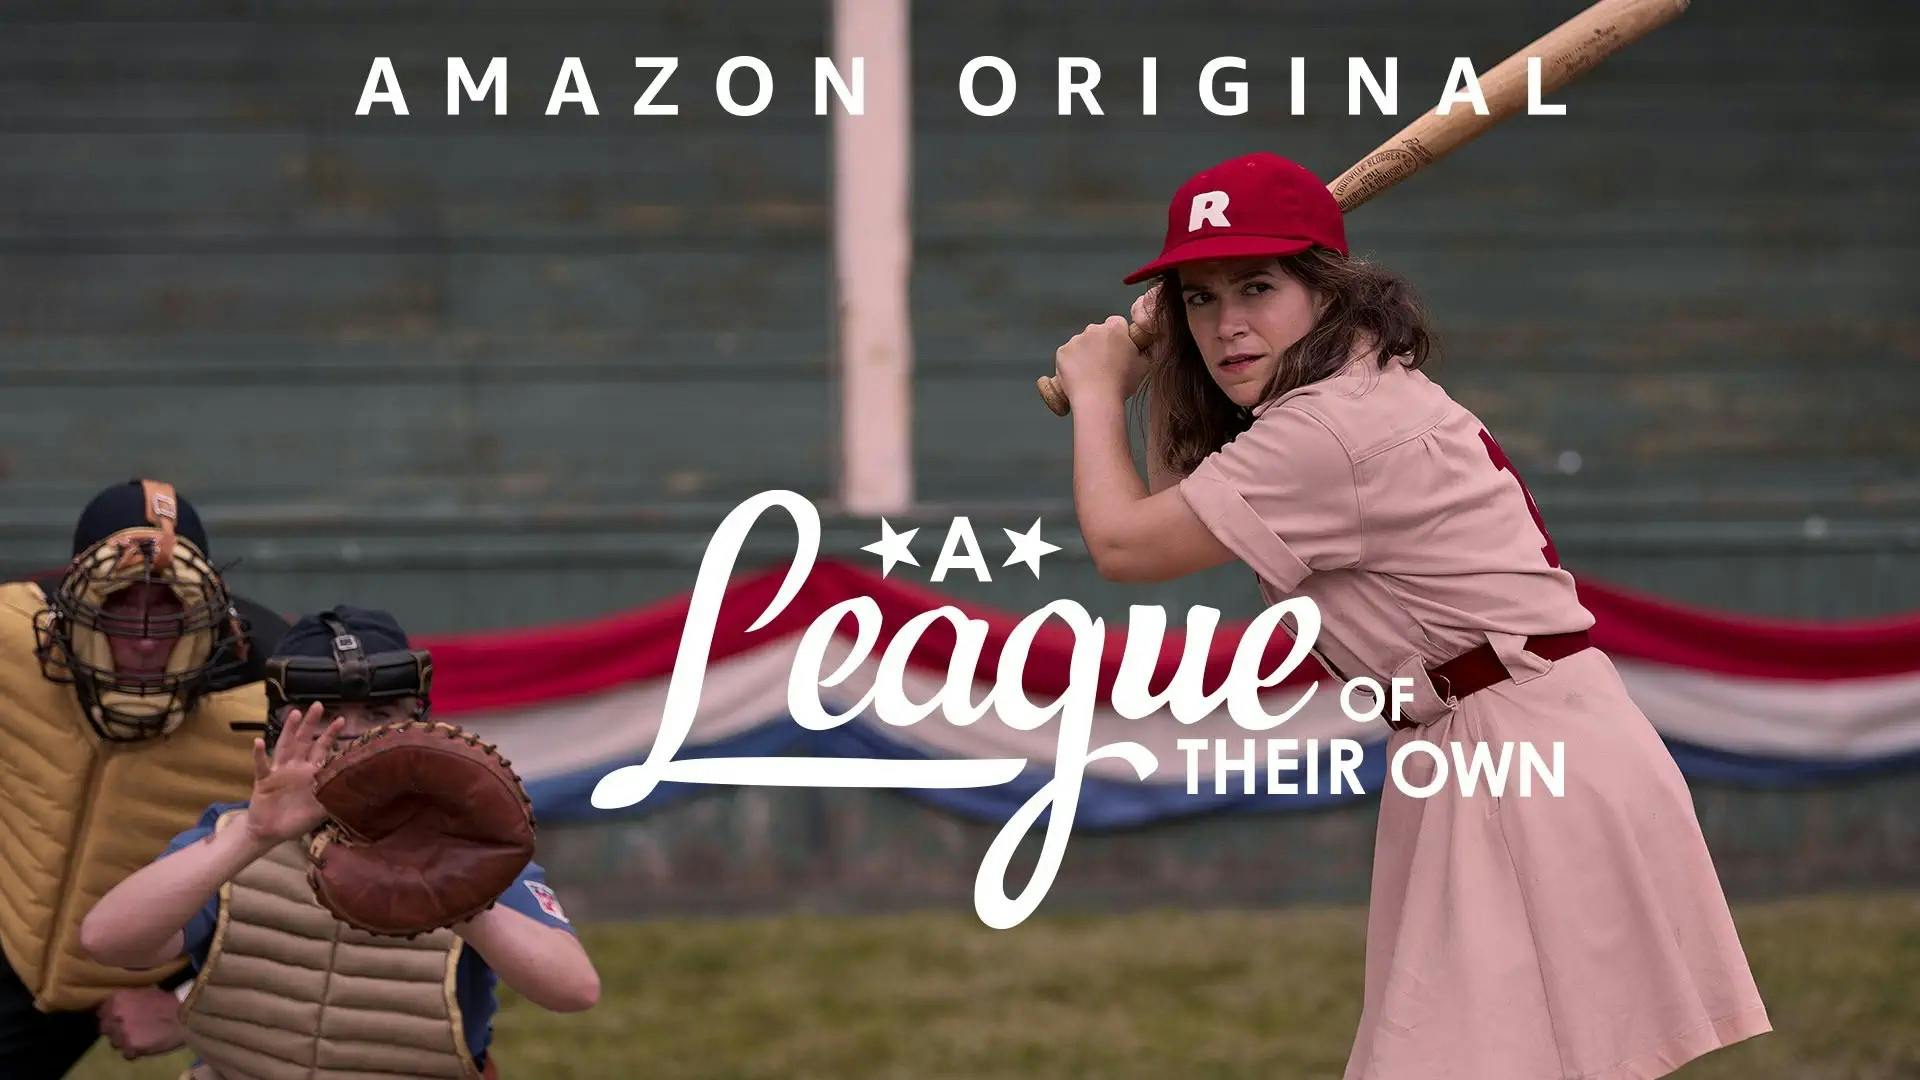 The thumbnail cover for the tv show A League of Their Own